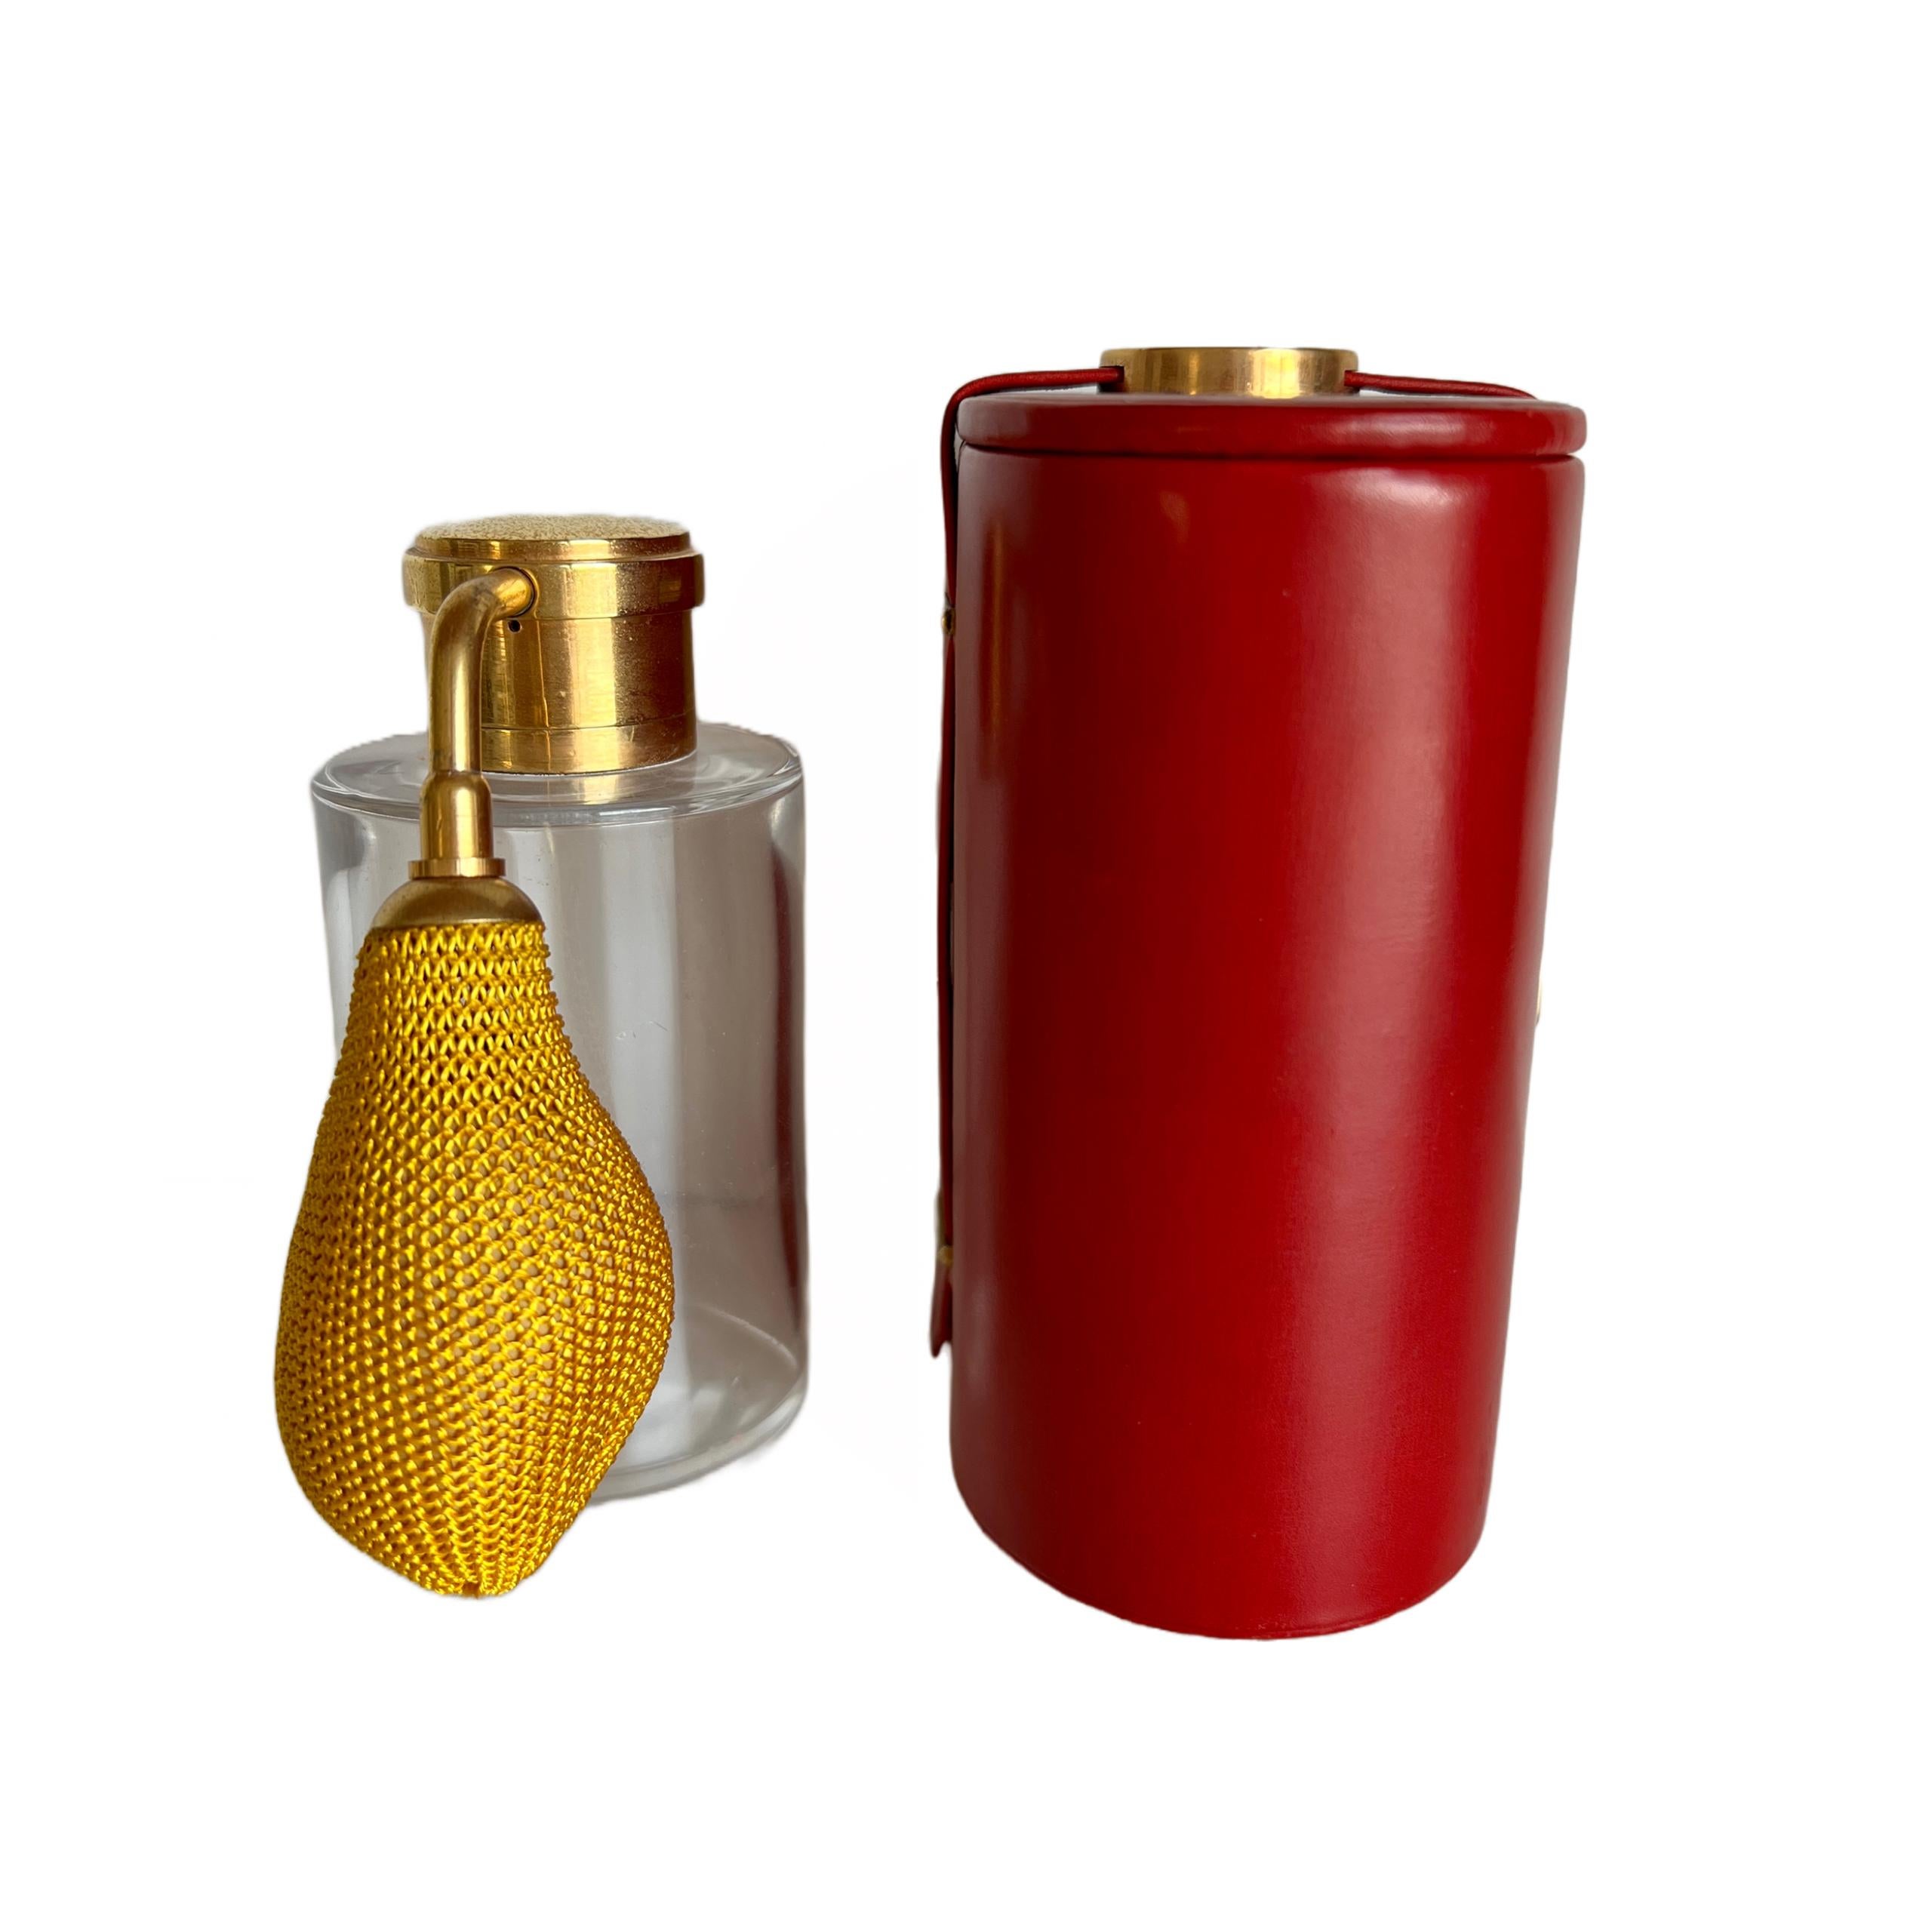 Art Deco Baccarat Atomizer Perfume Bottle for Guerlain Travel Red Leather Case